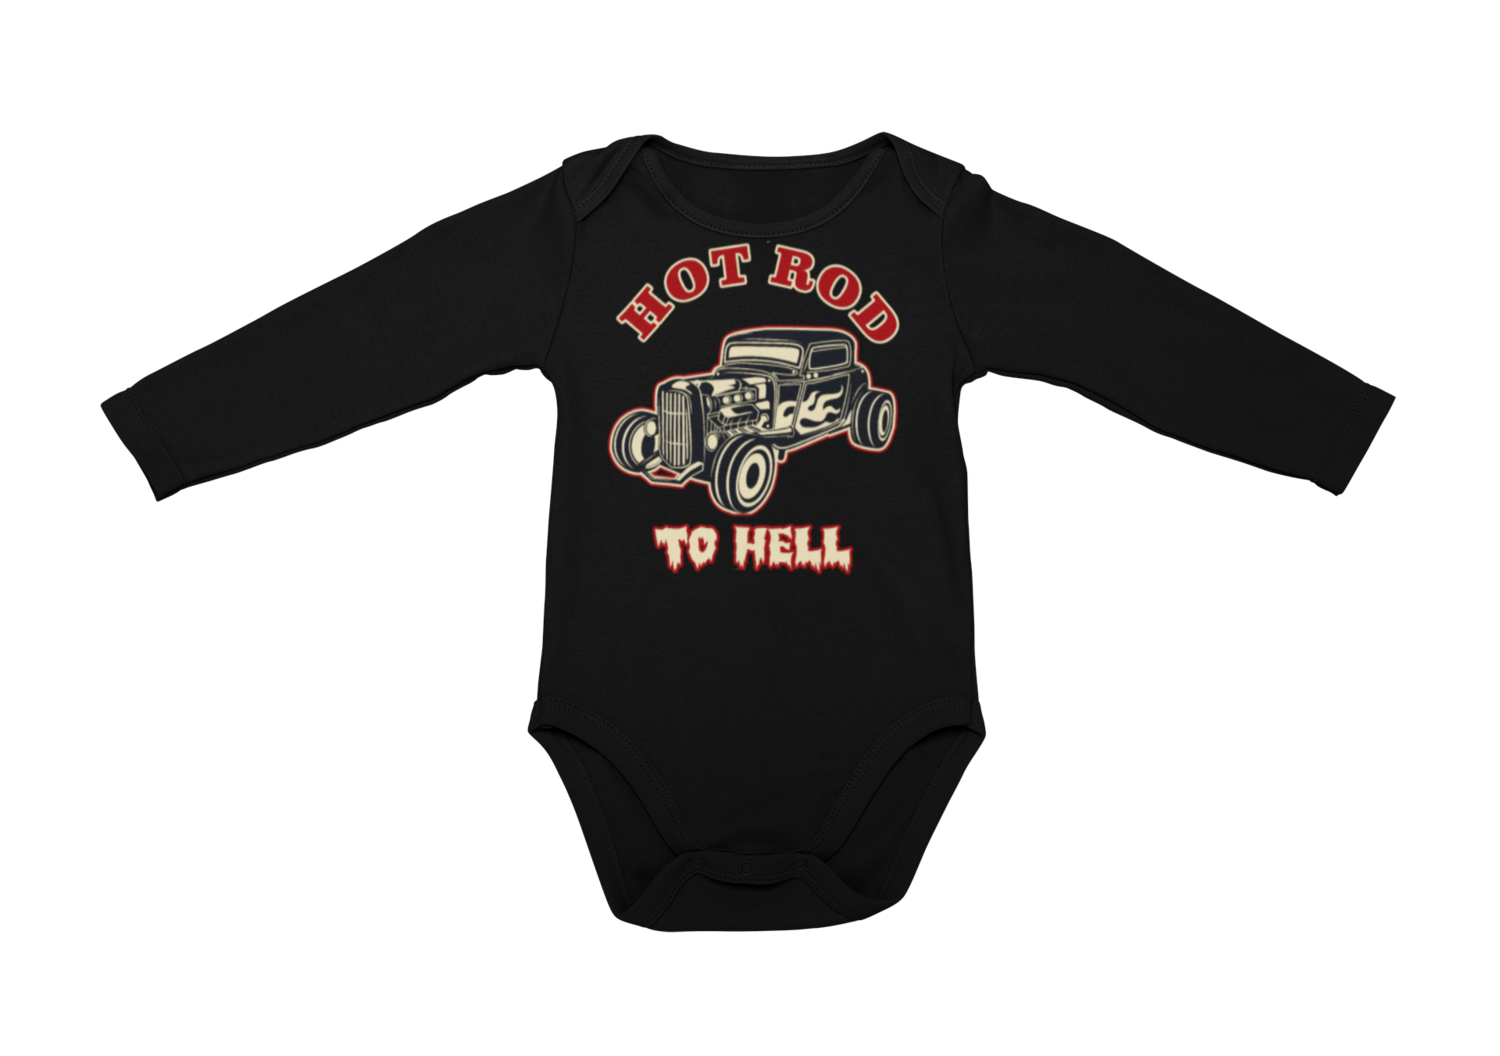 HOT ROD TO HELL BABY ONIESE